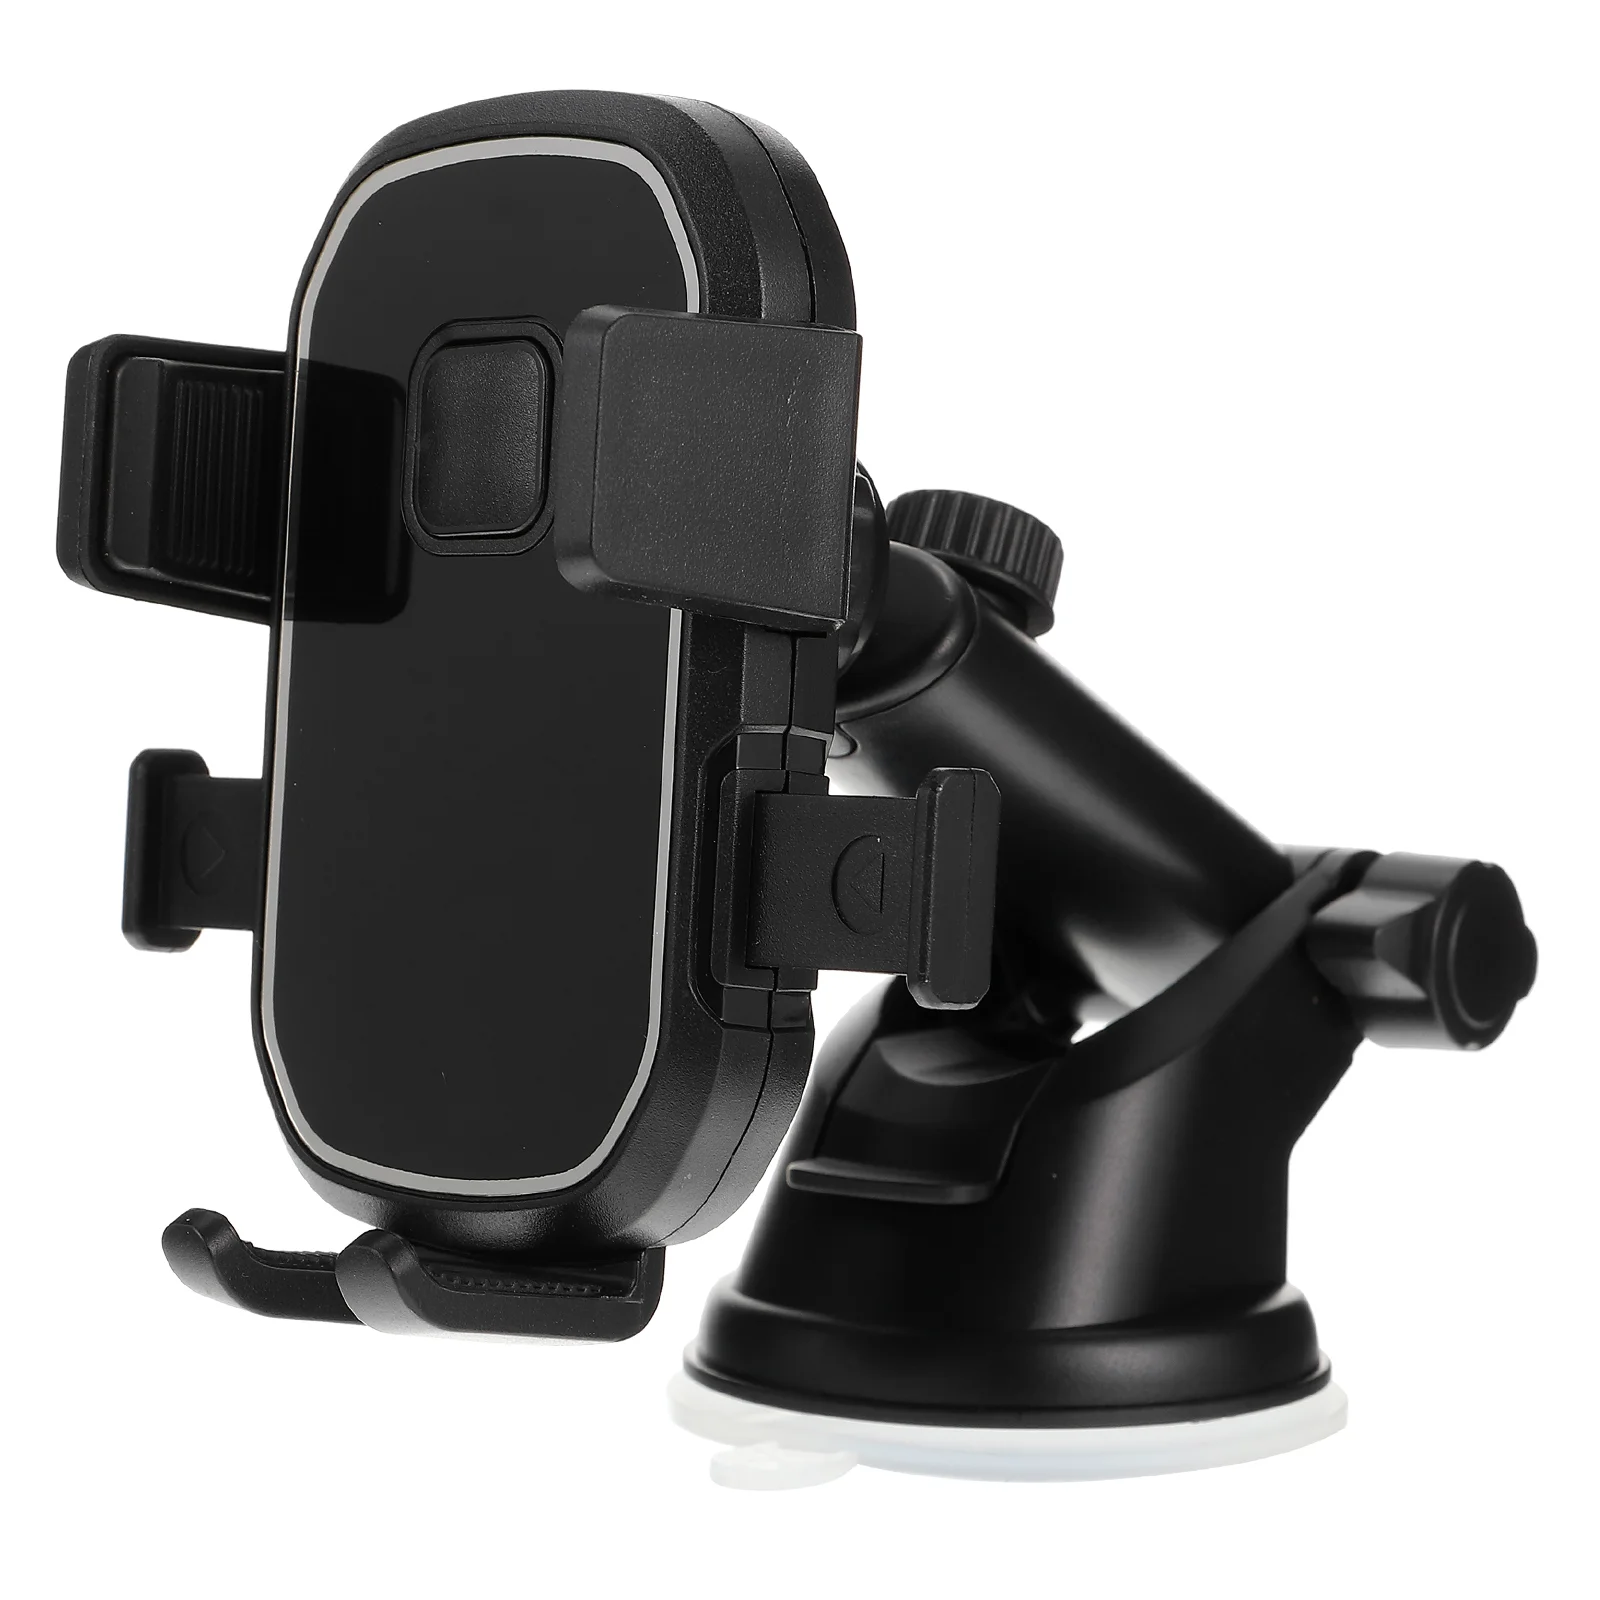 

Car Bracket Holder Mount Vent Rack Air Mobile Cell Dash Cradle Clampclip Using Stands Multifunctional Sucker Cupracks Suction